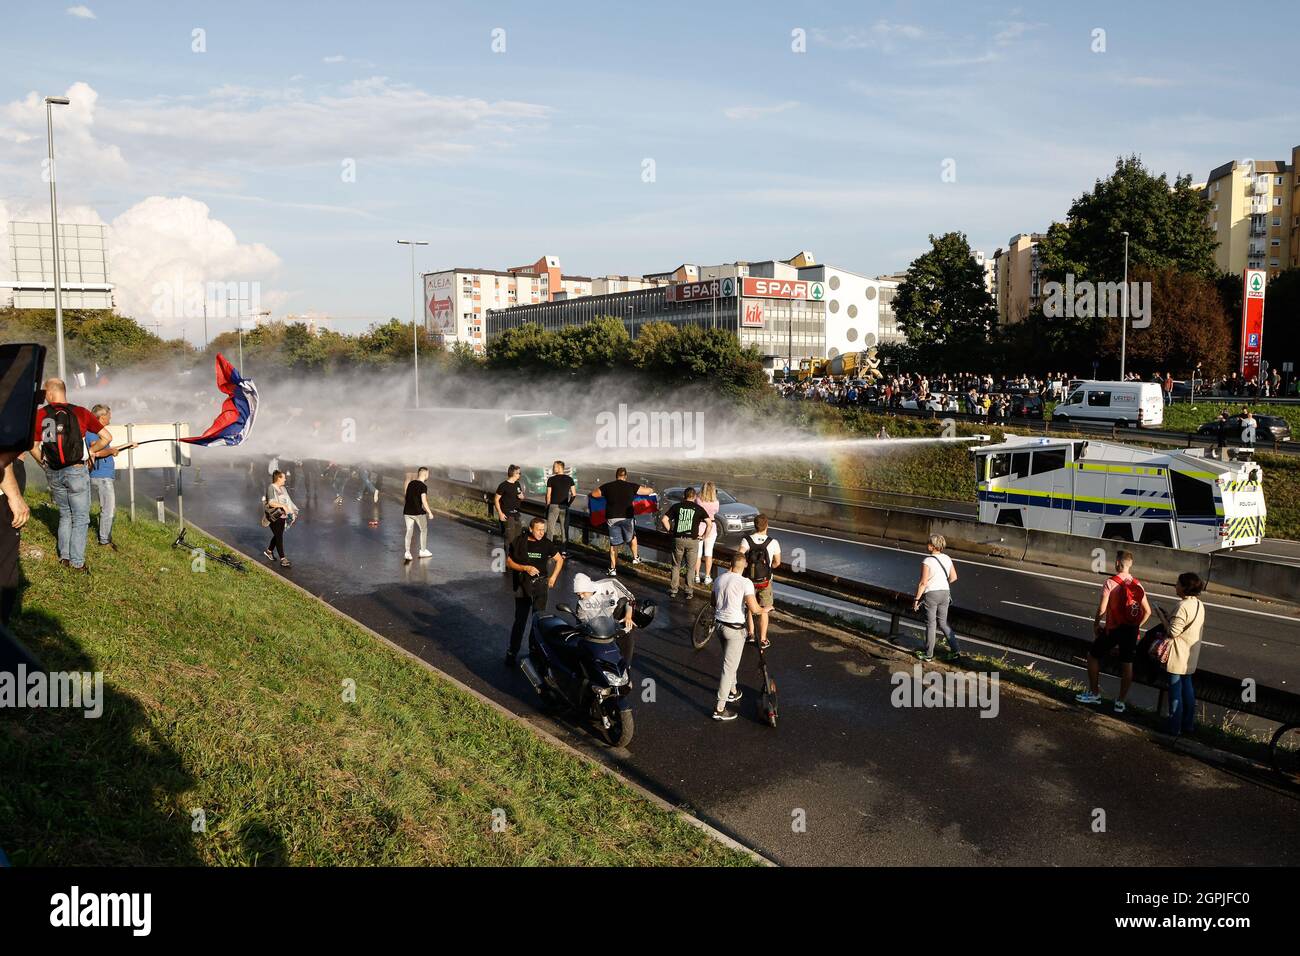 Ljubljana, Slovenia. 29th Sep, 2021. Police force uses a water cannon as protesters try to block the highway during the demonstration.Thousands of people protested against the government, covid measures, wearing of face masks, vaccines and RVT green pass (Recovered-Vaccinated-Tested) condition in Ljubljana, Slovenia. (Photo by Luka Dakskobler/SOPA Images/Sipa USA) Credit: Sipa USA/Alamy Live News Stock Photo